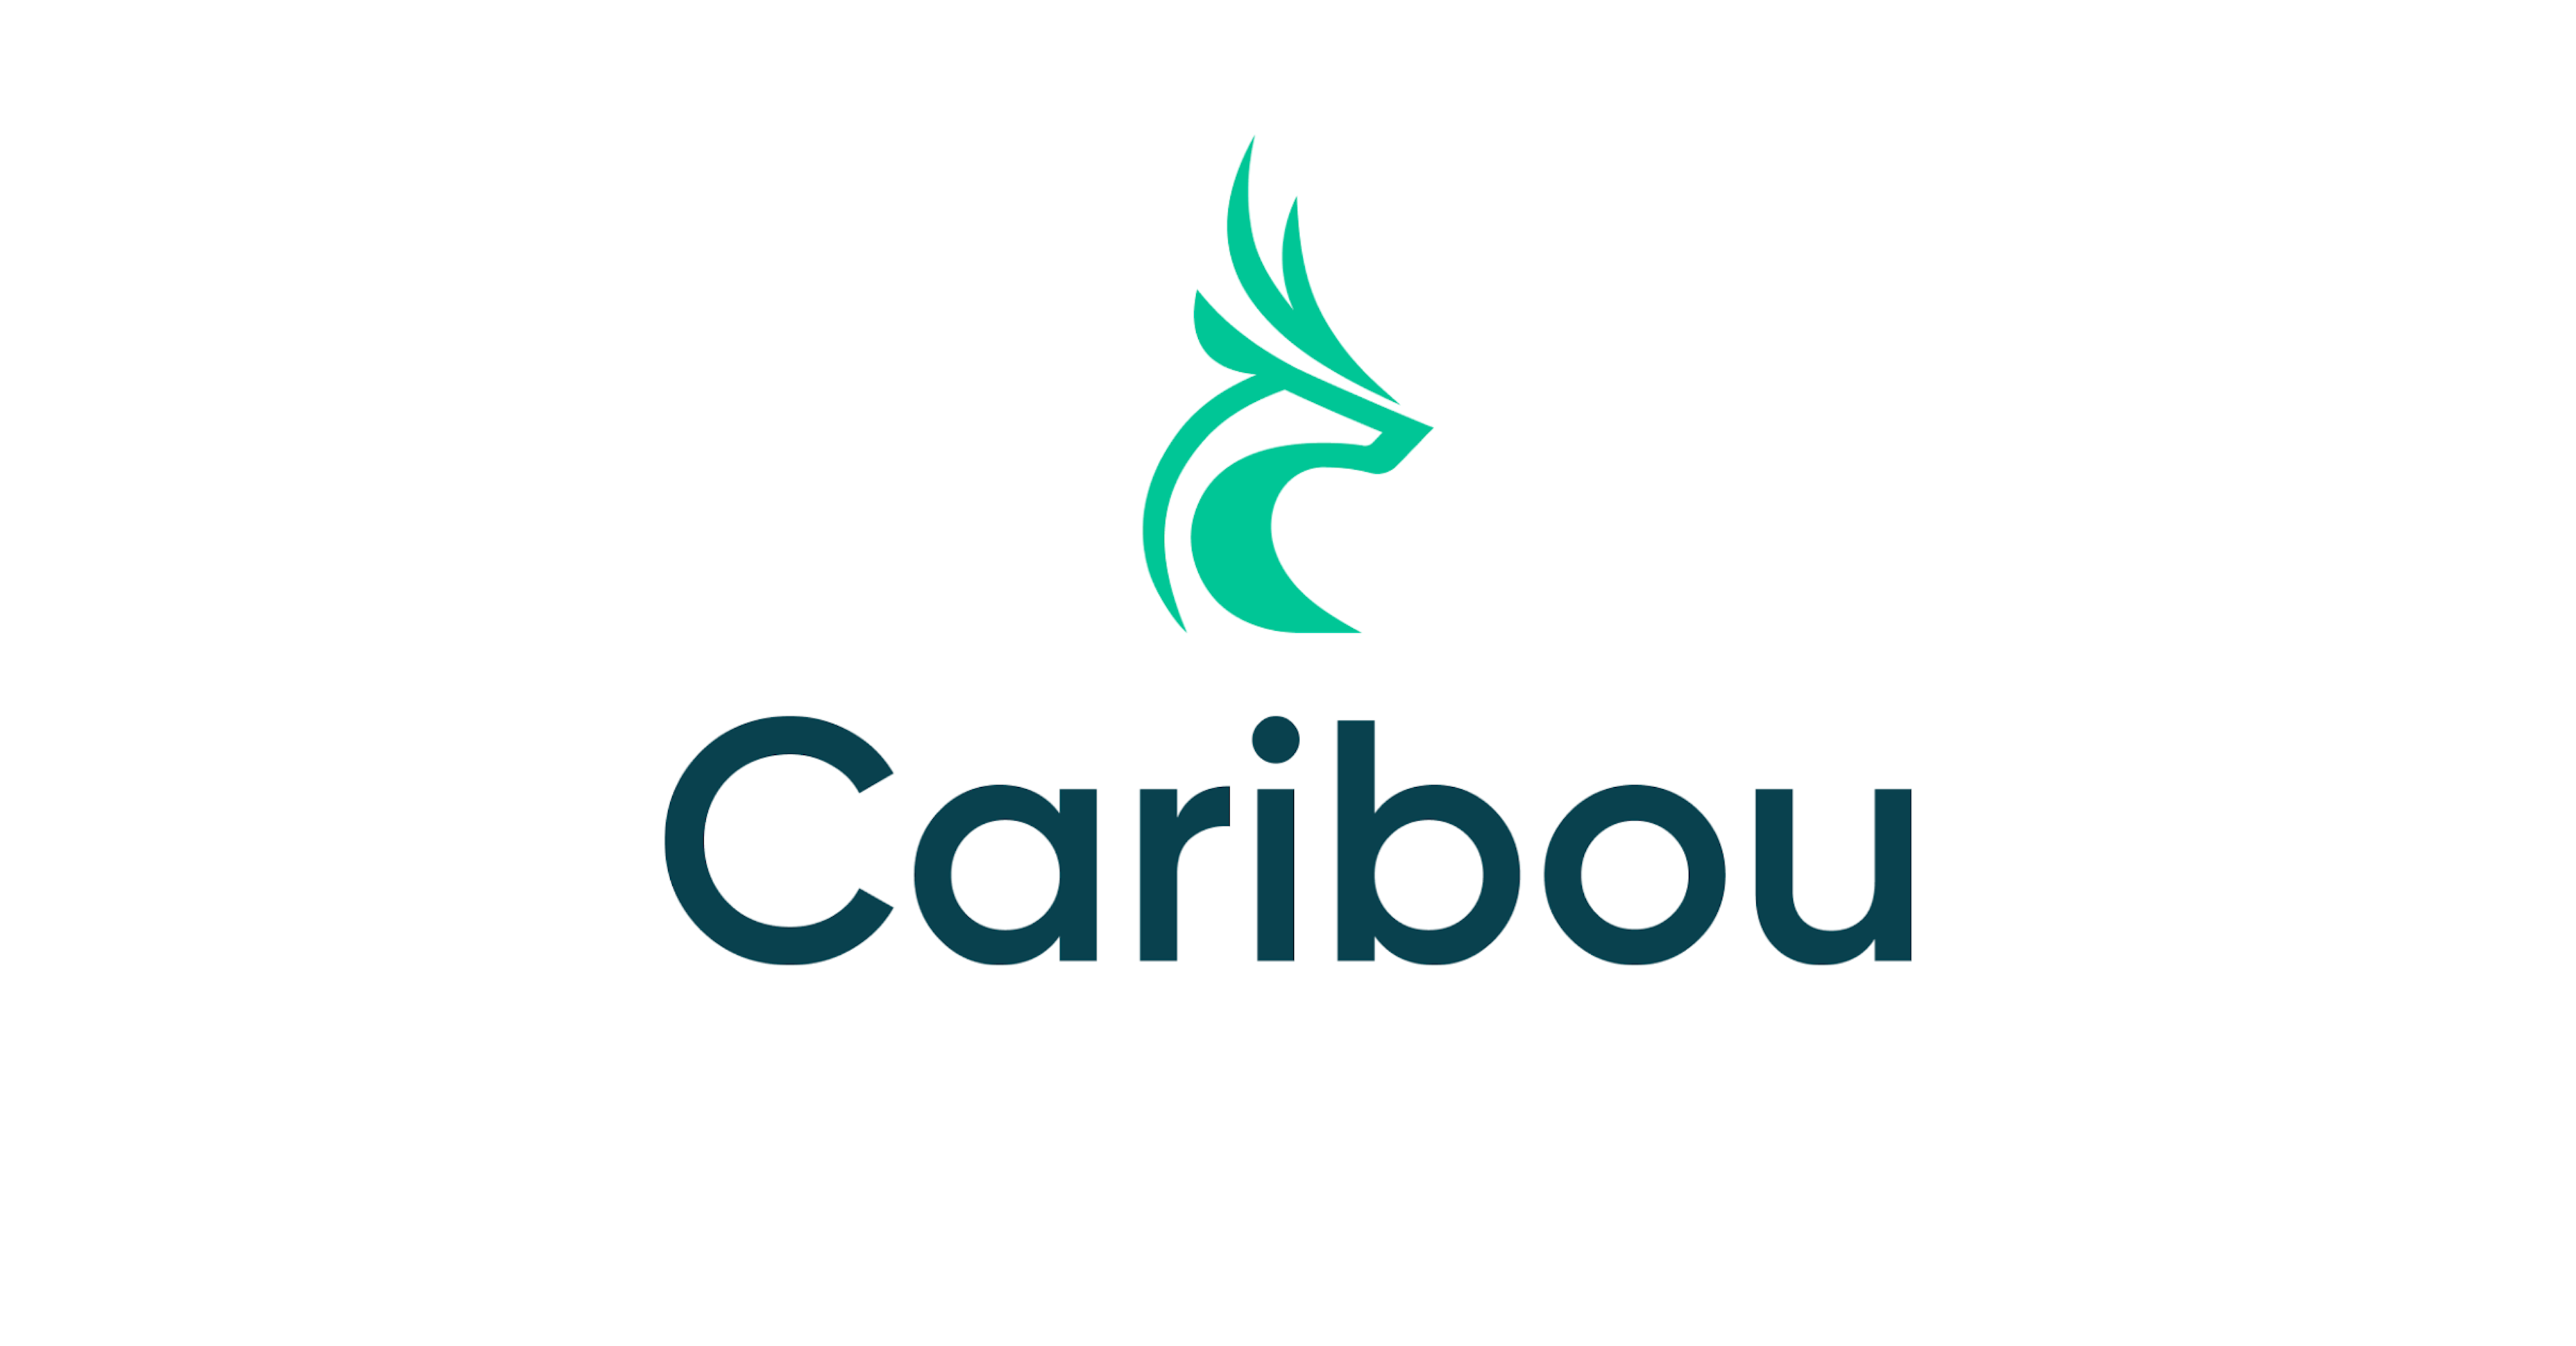 Working at Caribou - Build a Simple Way to Refinance